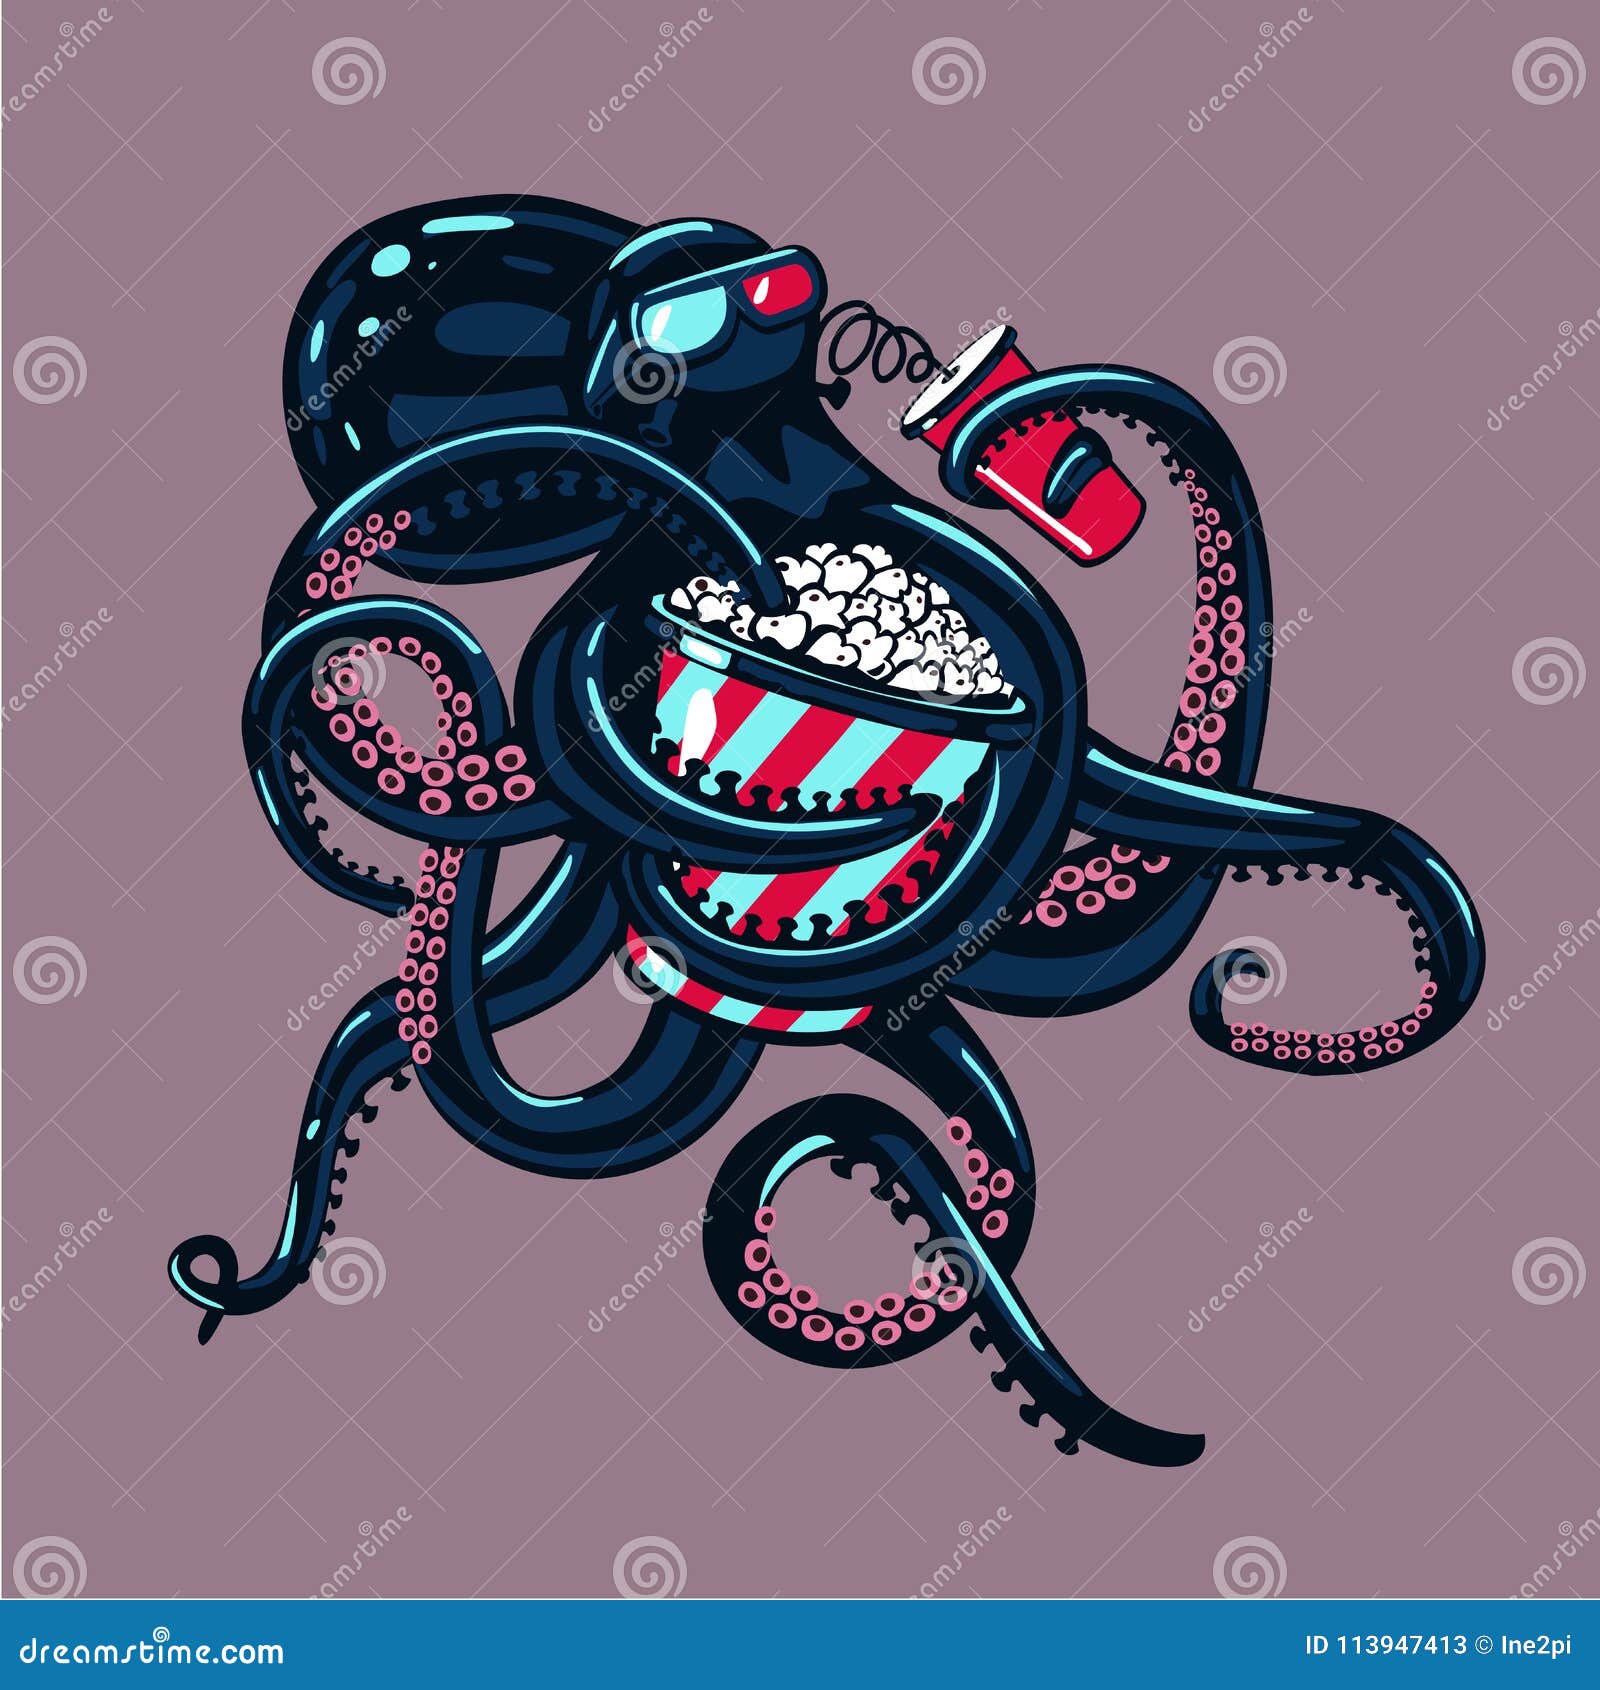 Cartoon Octopus is Watching Movies on 3d Glasses and Eating Popcorn.  Humorous Illustration Stock Vector - Illustration of funny, holding:  113947413